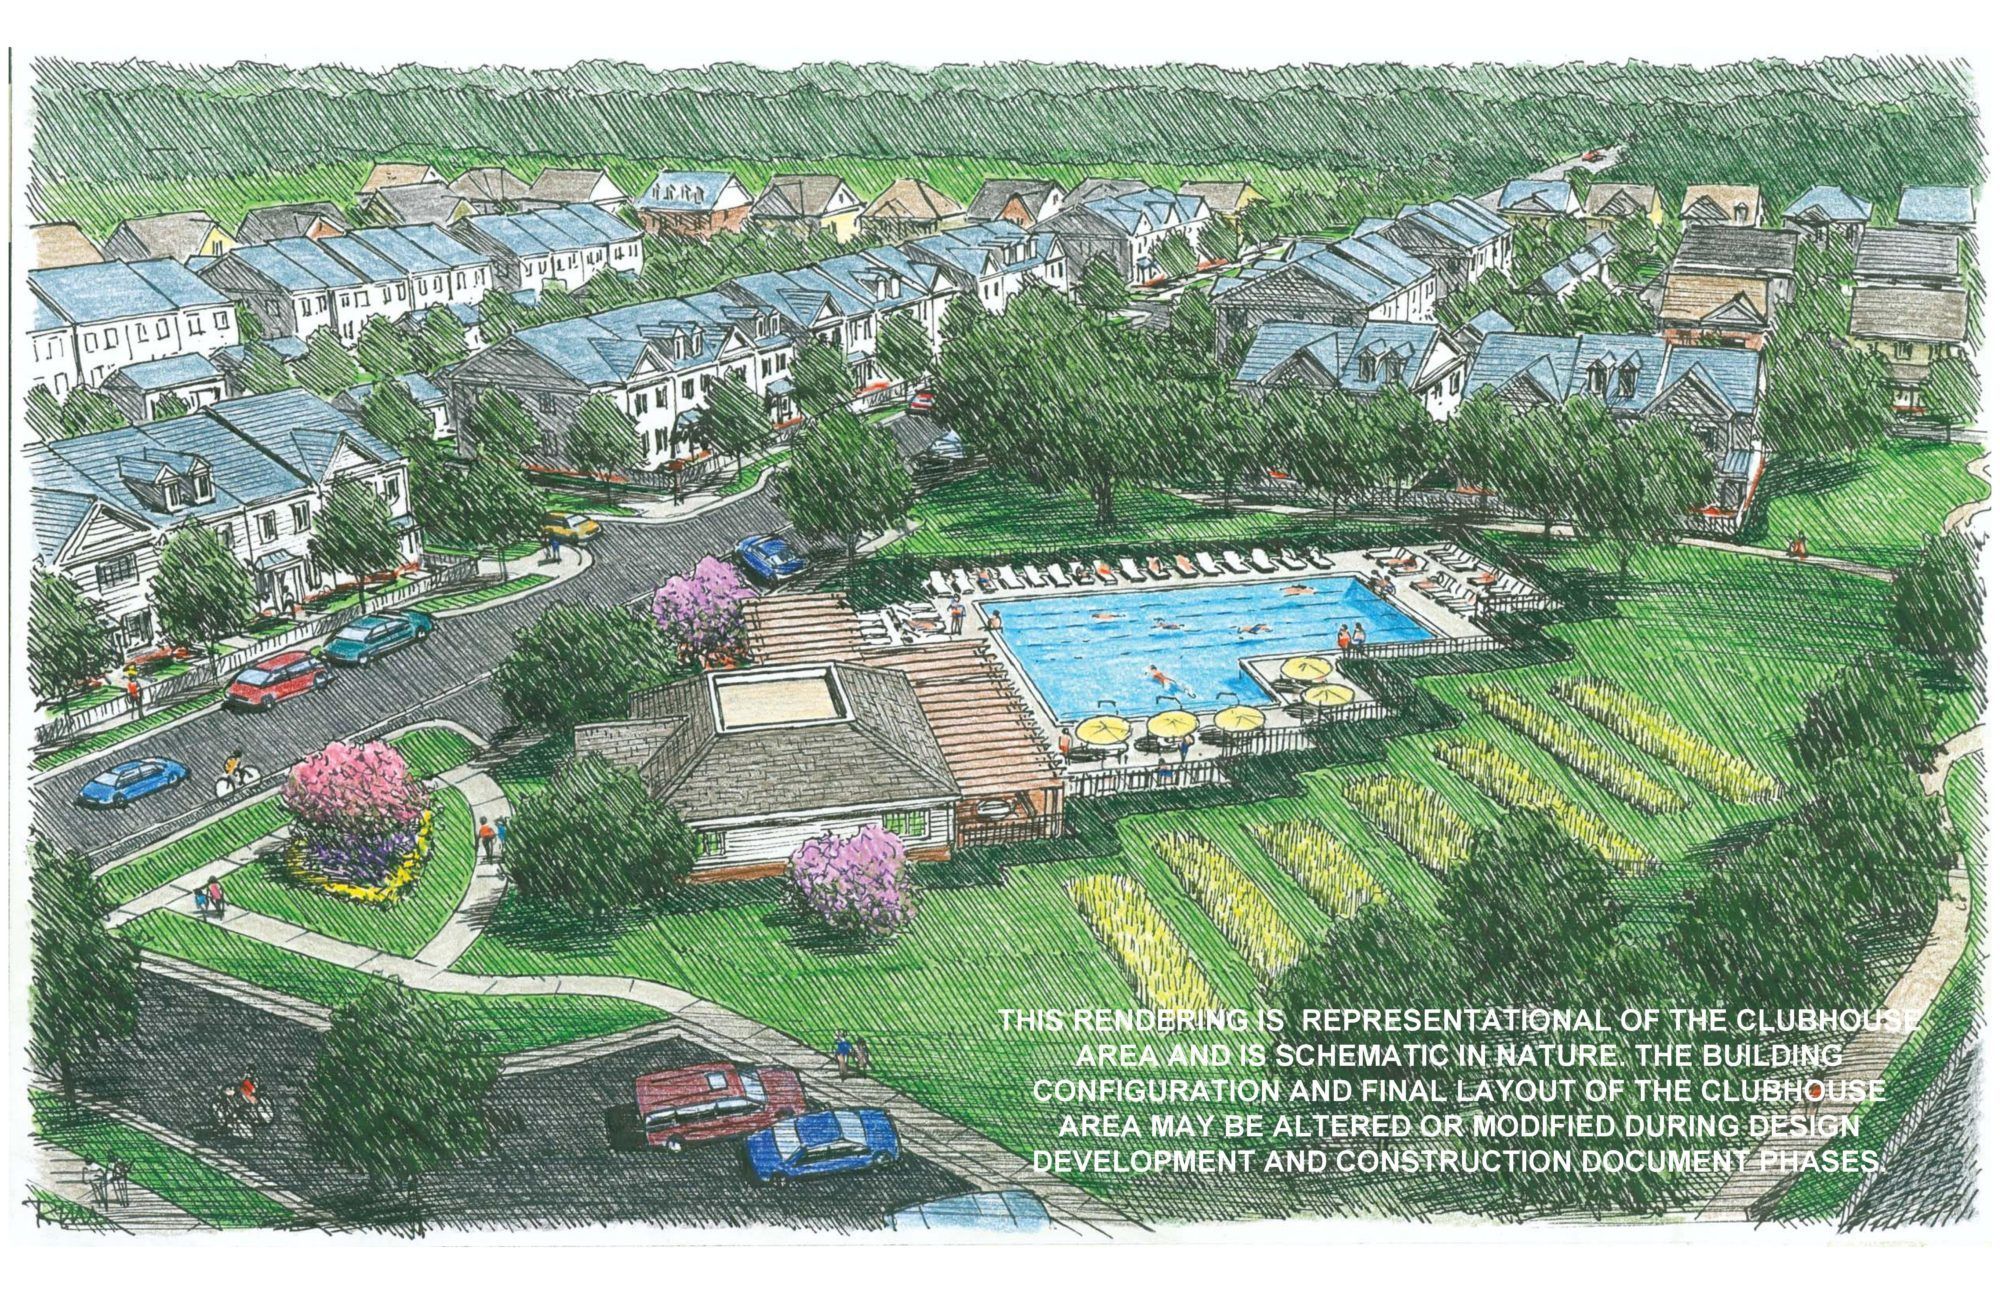 Rendering of the clubhouse and pool of Westbranch in Davidson